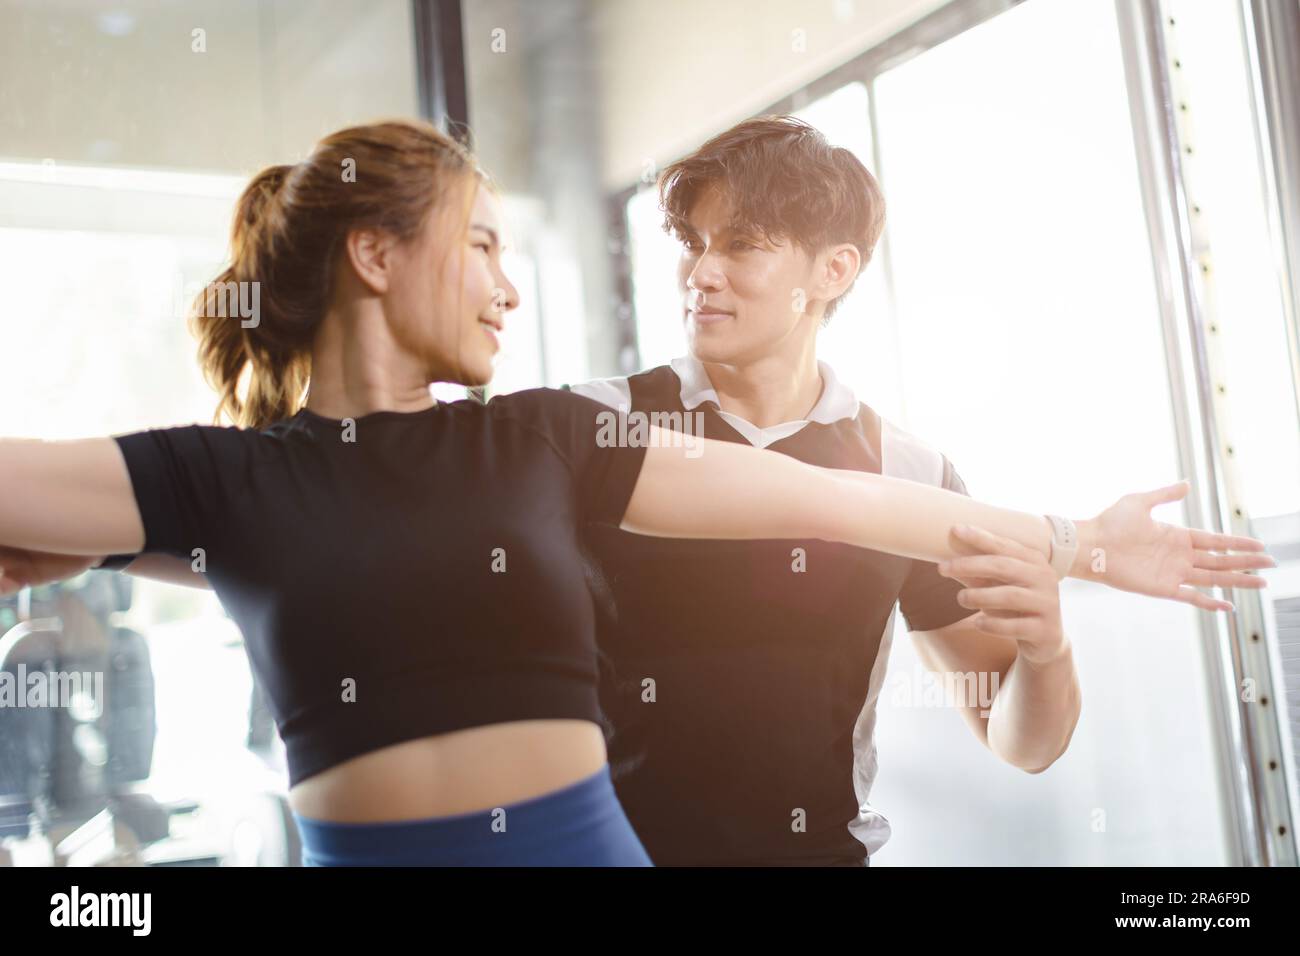 Healthy people asian young woman sport exercise in fitness gym sport club with personal trainer instructors help support. Stock Photo